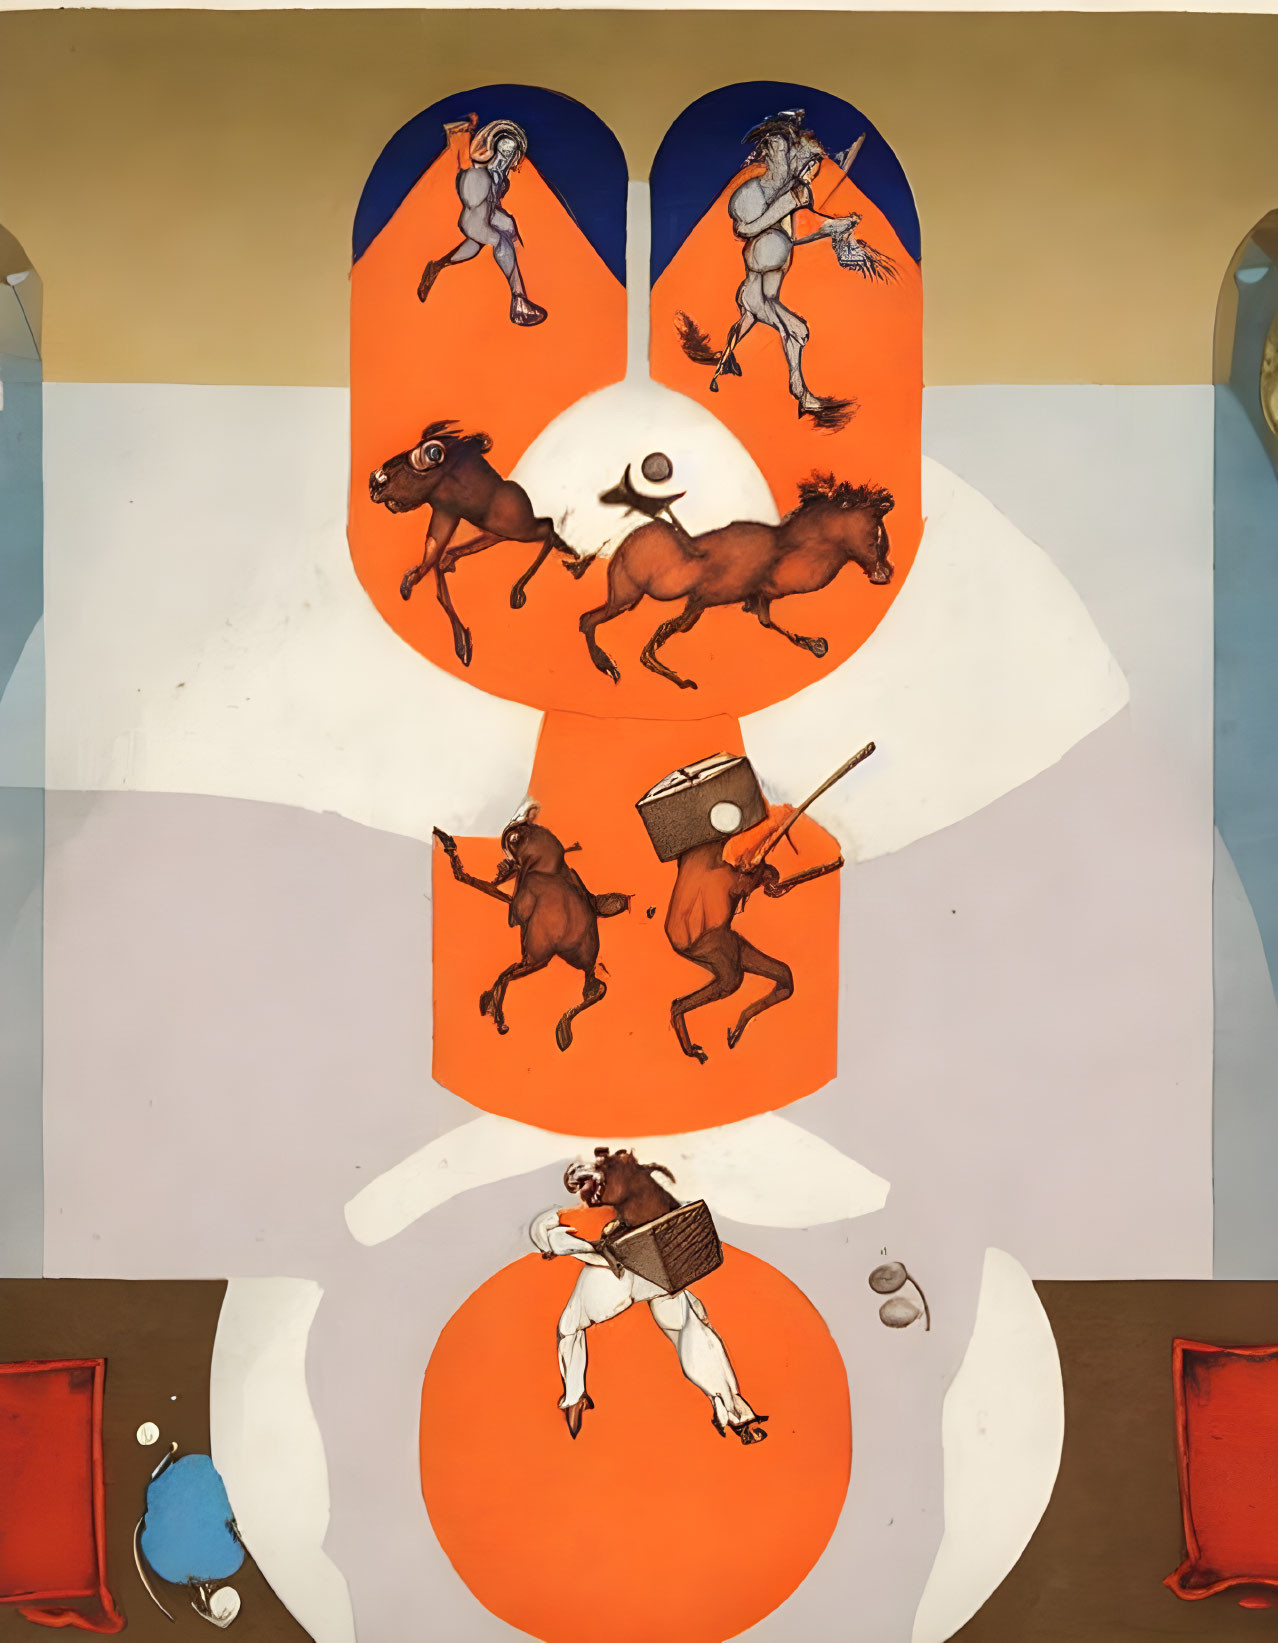 Surreal anthropomorphic figures on horses in orange shapes amidst abstract forms on beige backdrop